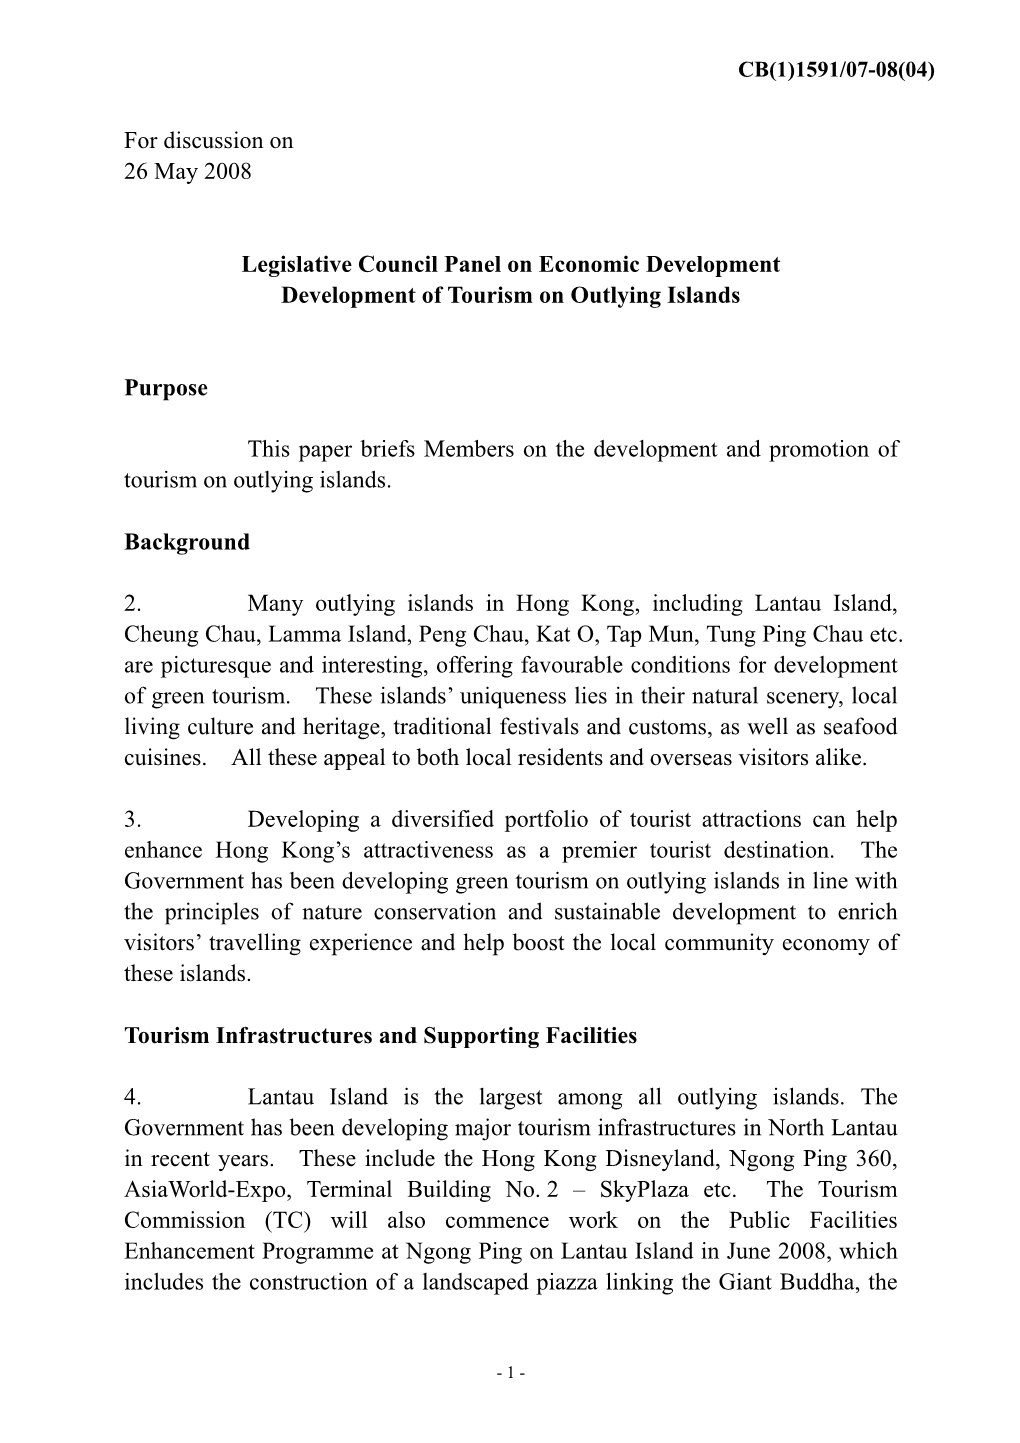 Administration's Paper on Tourism Development on Outlying Islands